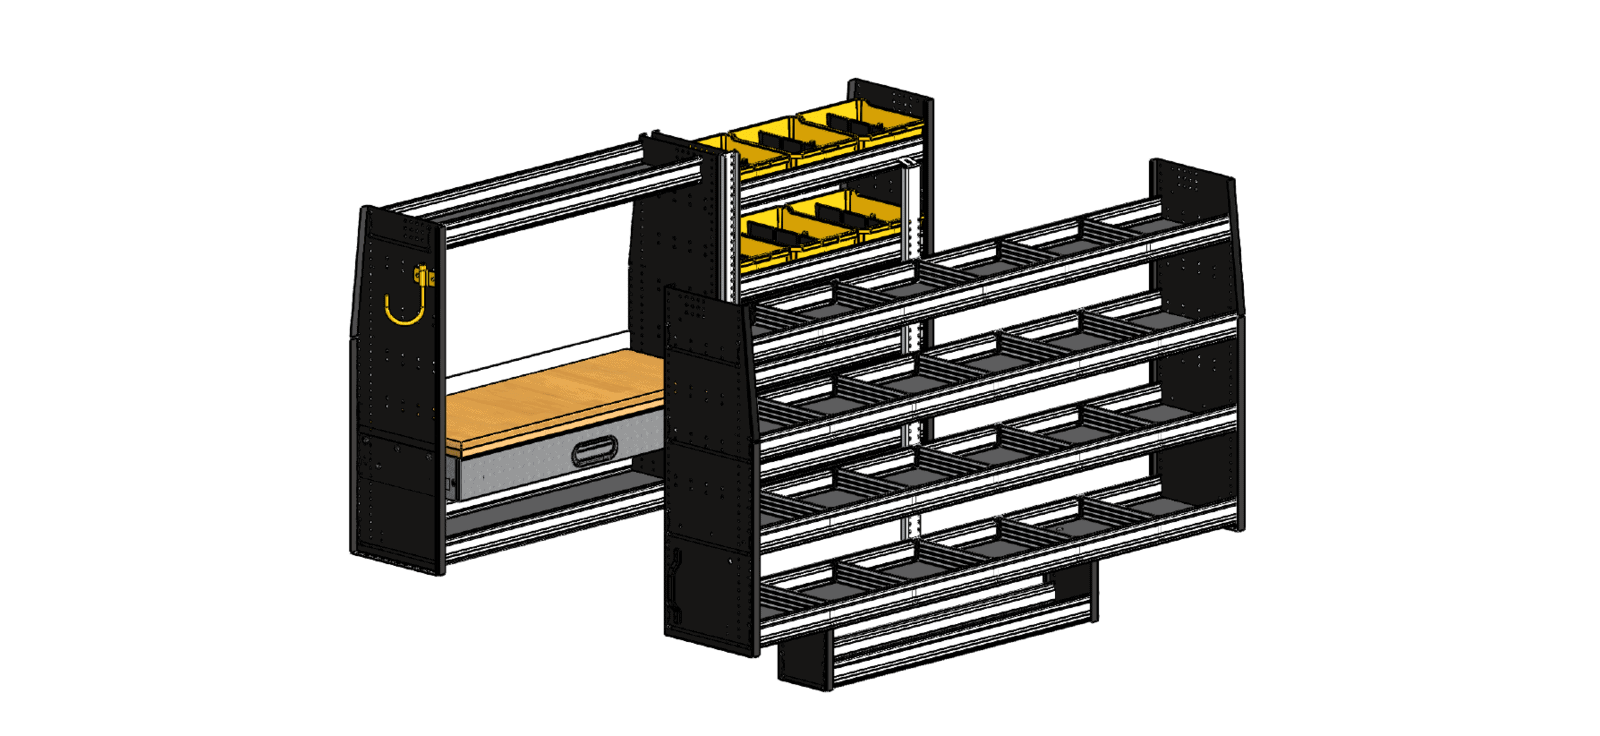 QSP WORKSTATION Ranger shelving solutions set with a workbench coupled with shelving, dividers, and bins the Diablo servoce body